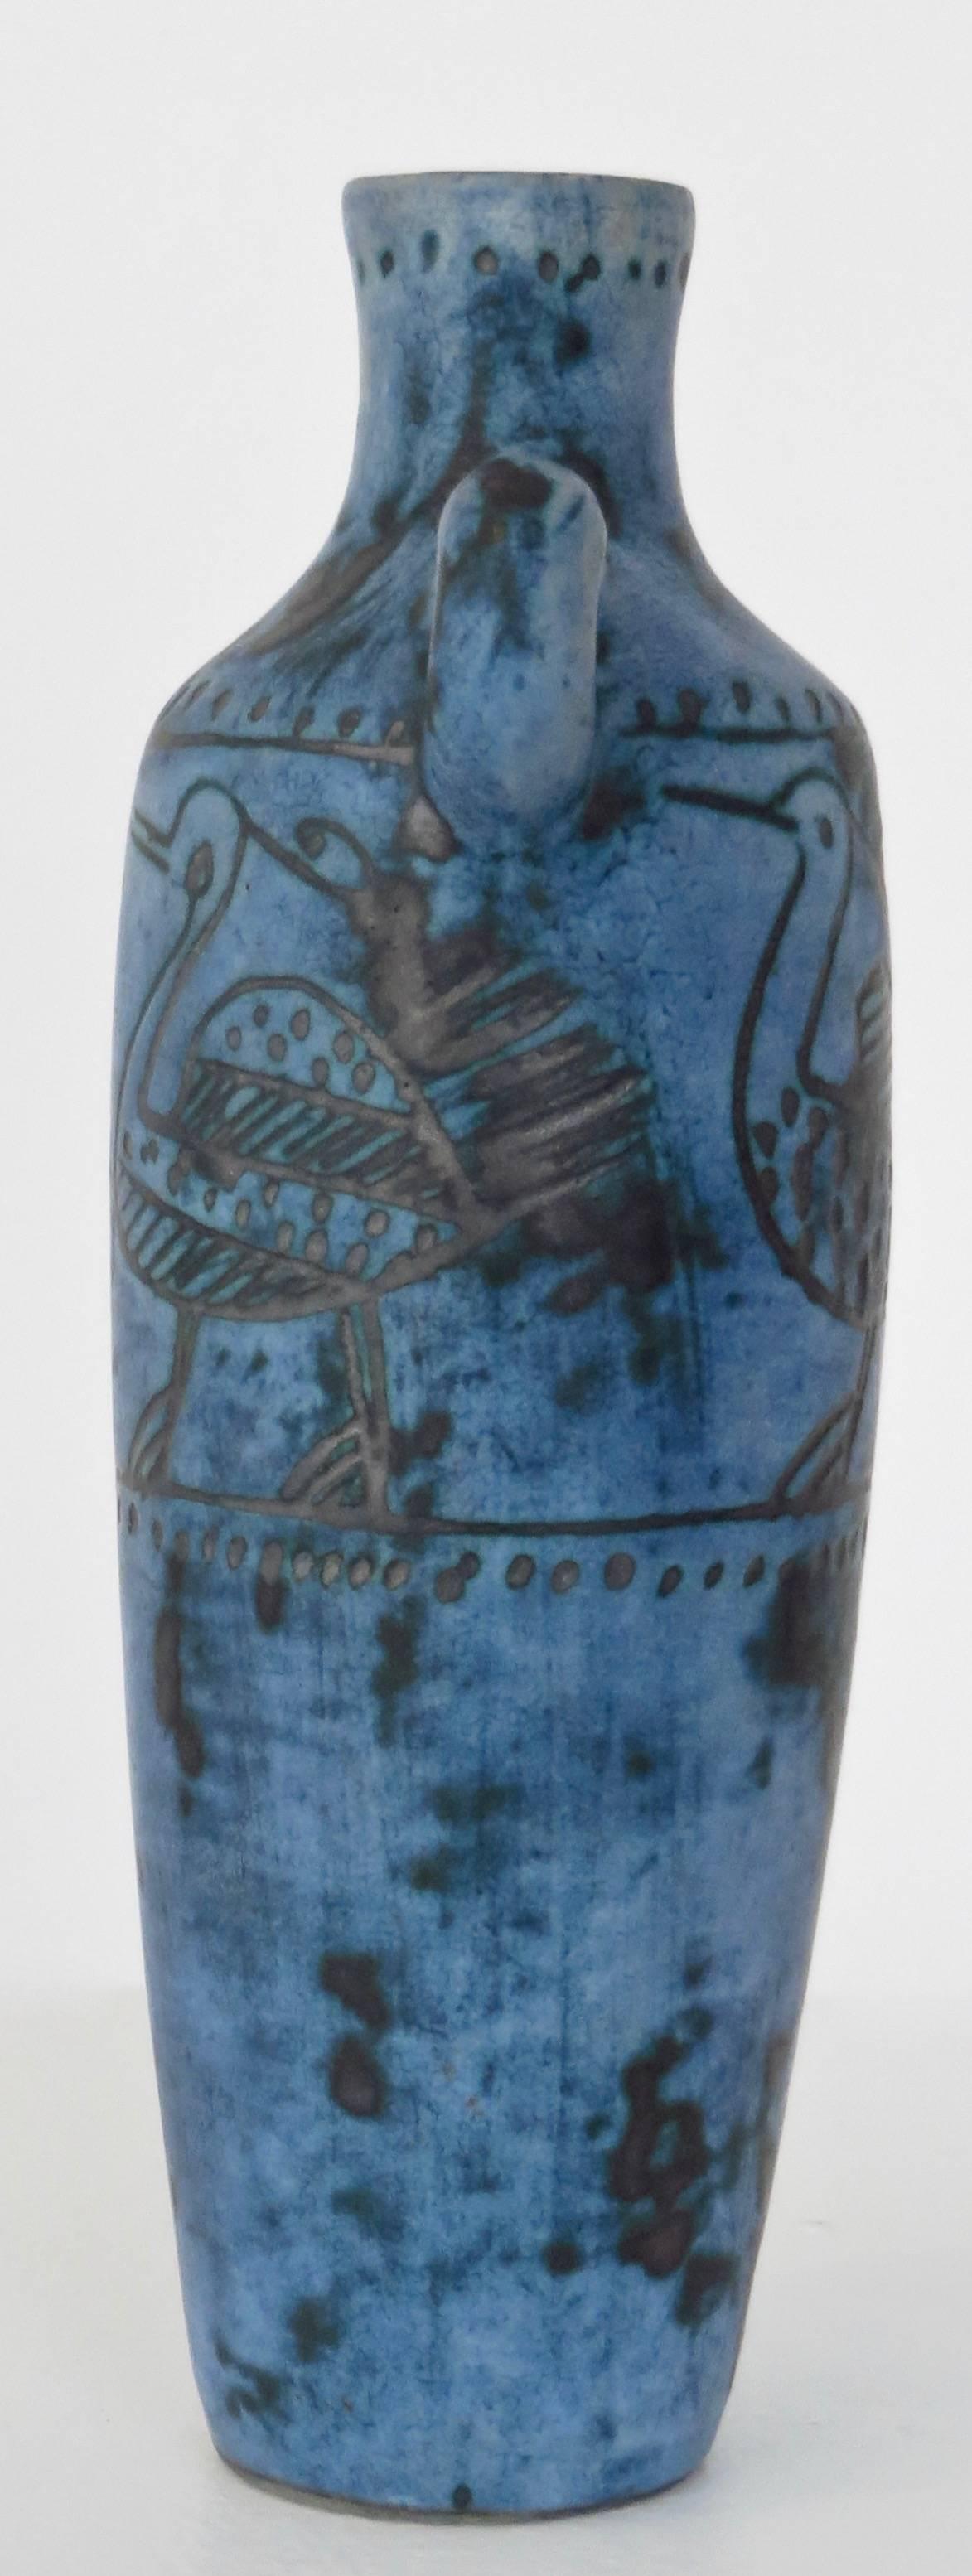 A French ceramic bottle by noted artist Jacques Blin with wonderful image of a bird in his iconic blue glaze. Wonderful detail around the shoulder and neck of the bottle. No chips or restorations. Signed.